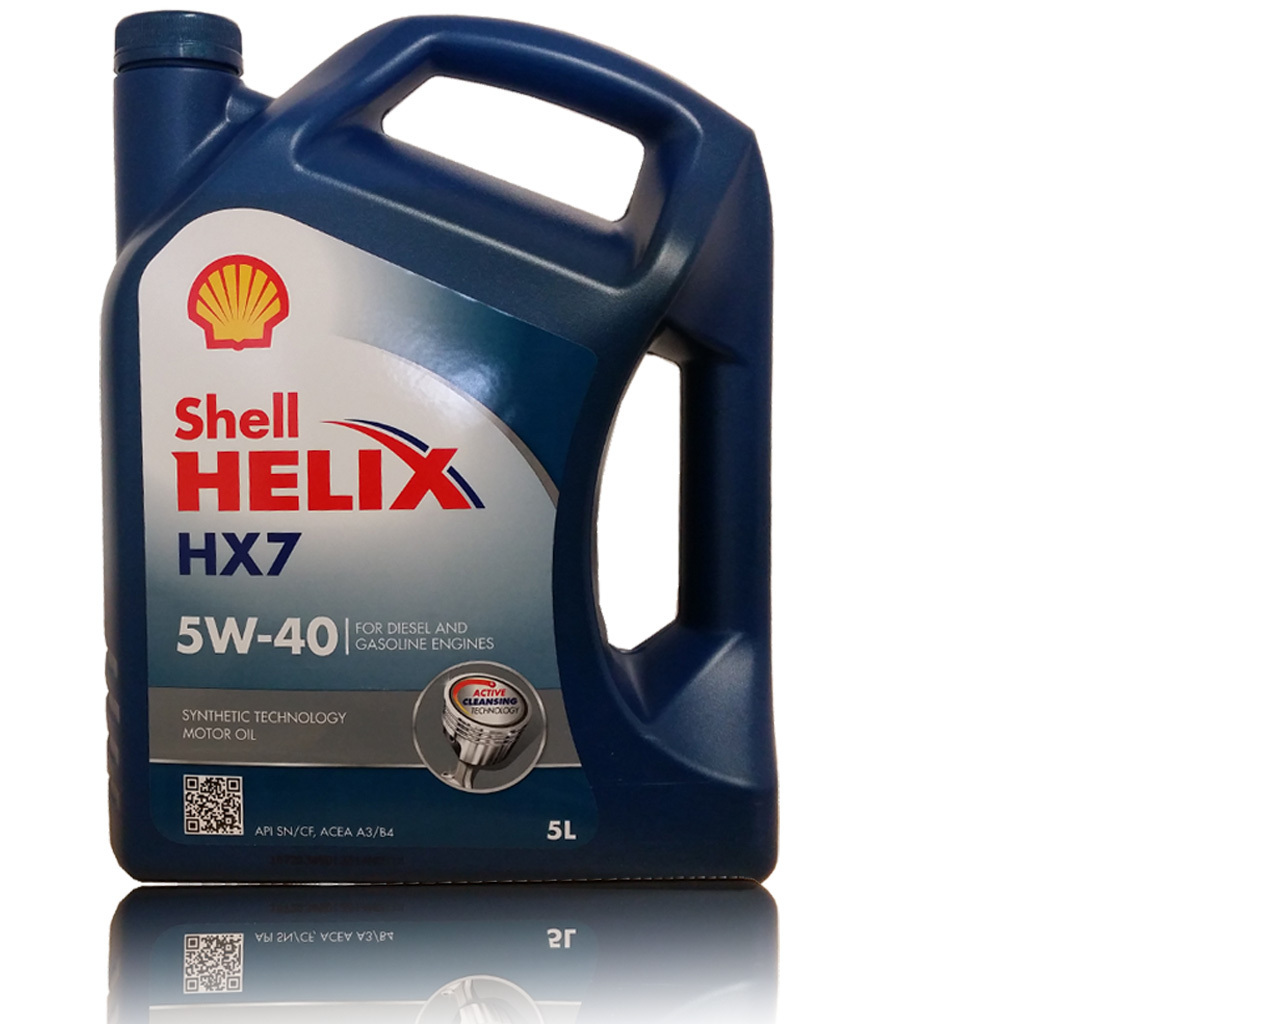 Моторное масло shell helix цена. Масло Shell hx7 5w40. Шелл hx7 5w40. Shell Helix hx7 5w-40. Масло моторное Shell Helix HX 7 5w40.